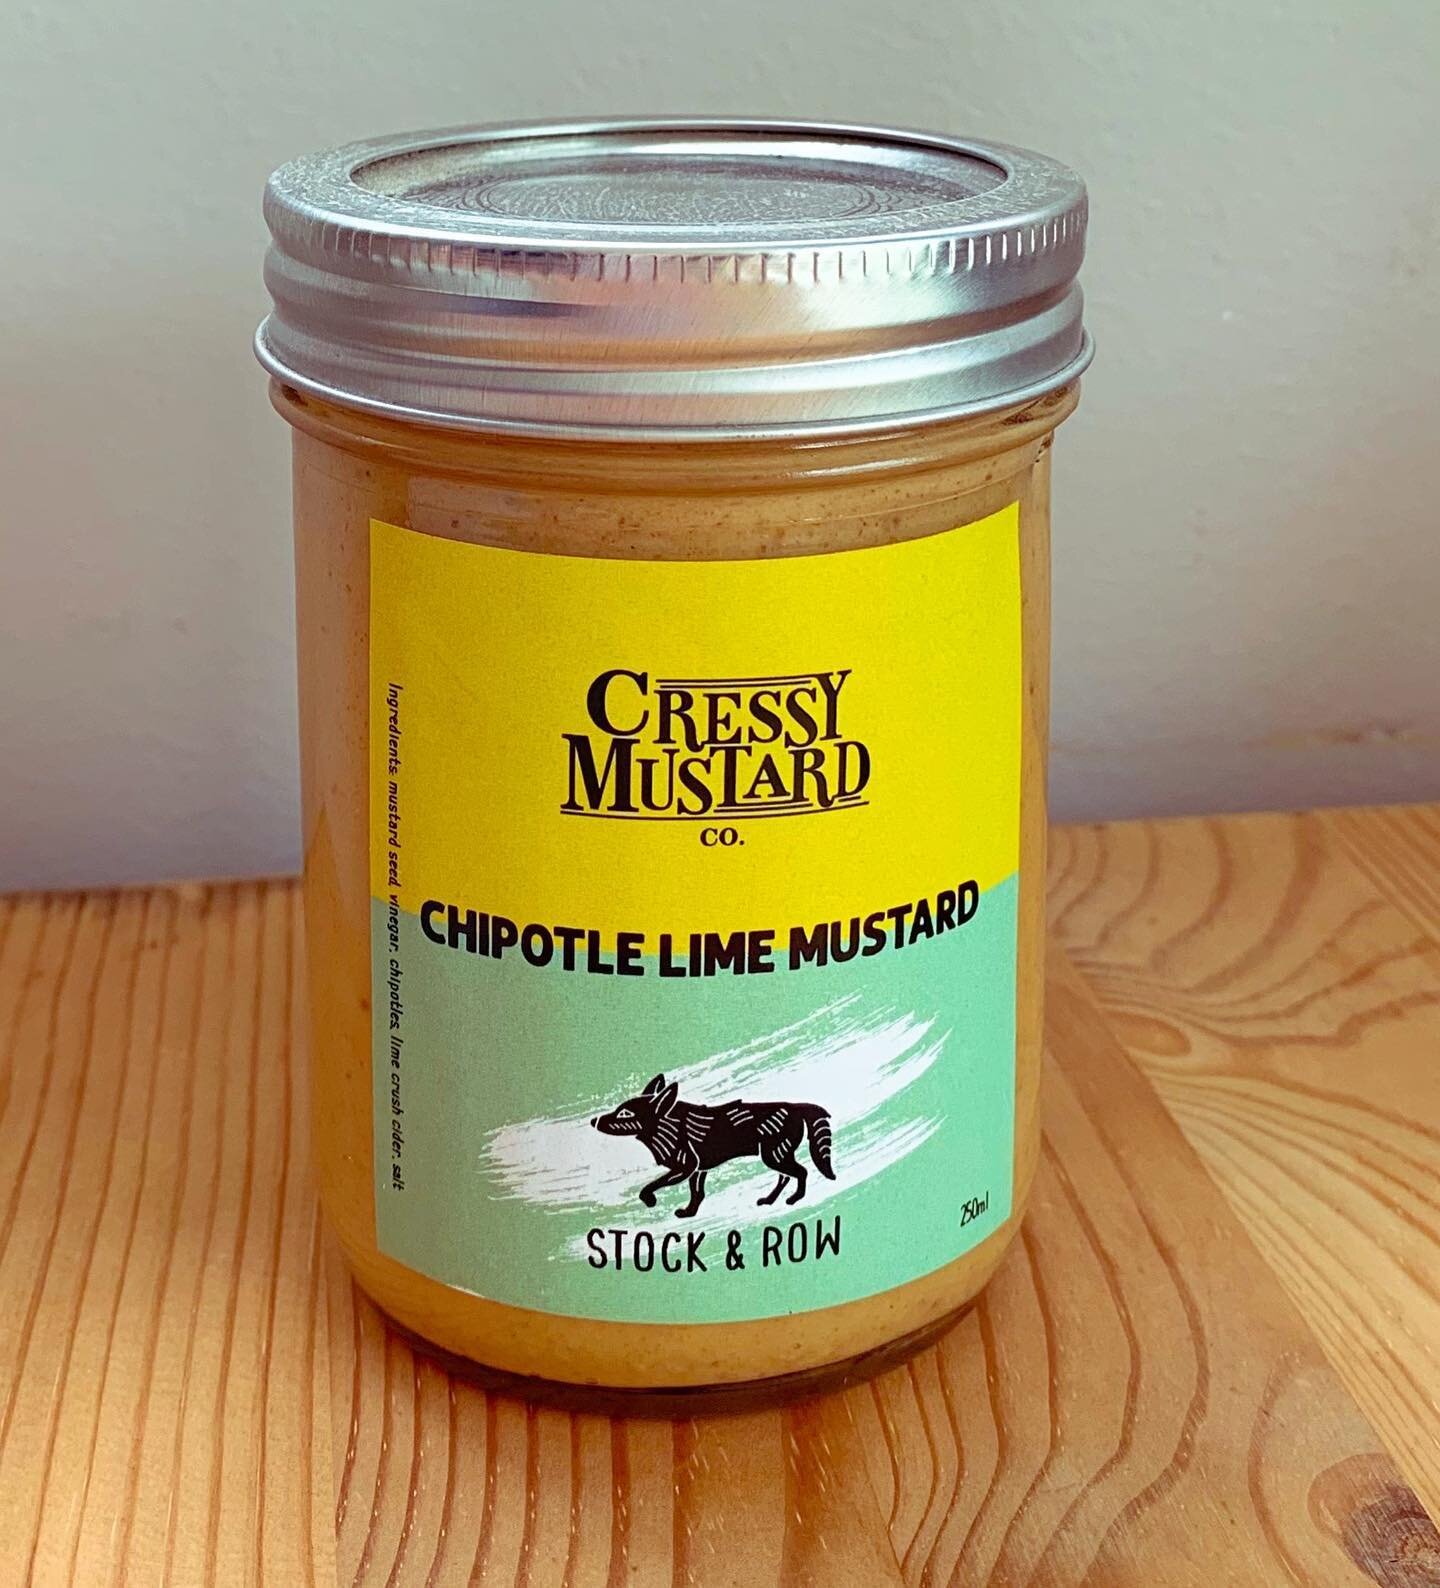 HAVE YOU TRIED OUR LATEST COLLAB YET??

we&rsquo;ve switched it up &amp; brought back one of our OG faves with a twist!!

fresh lime juice? so yesterday😉introducing our chipotle lime mustard featuring @stockandrow &lsquo;s  lime crush cider! 

this 